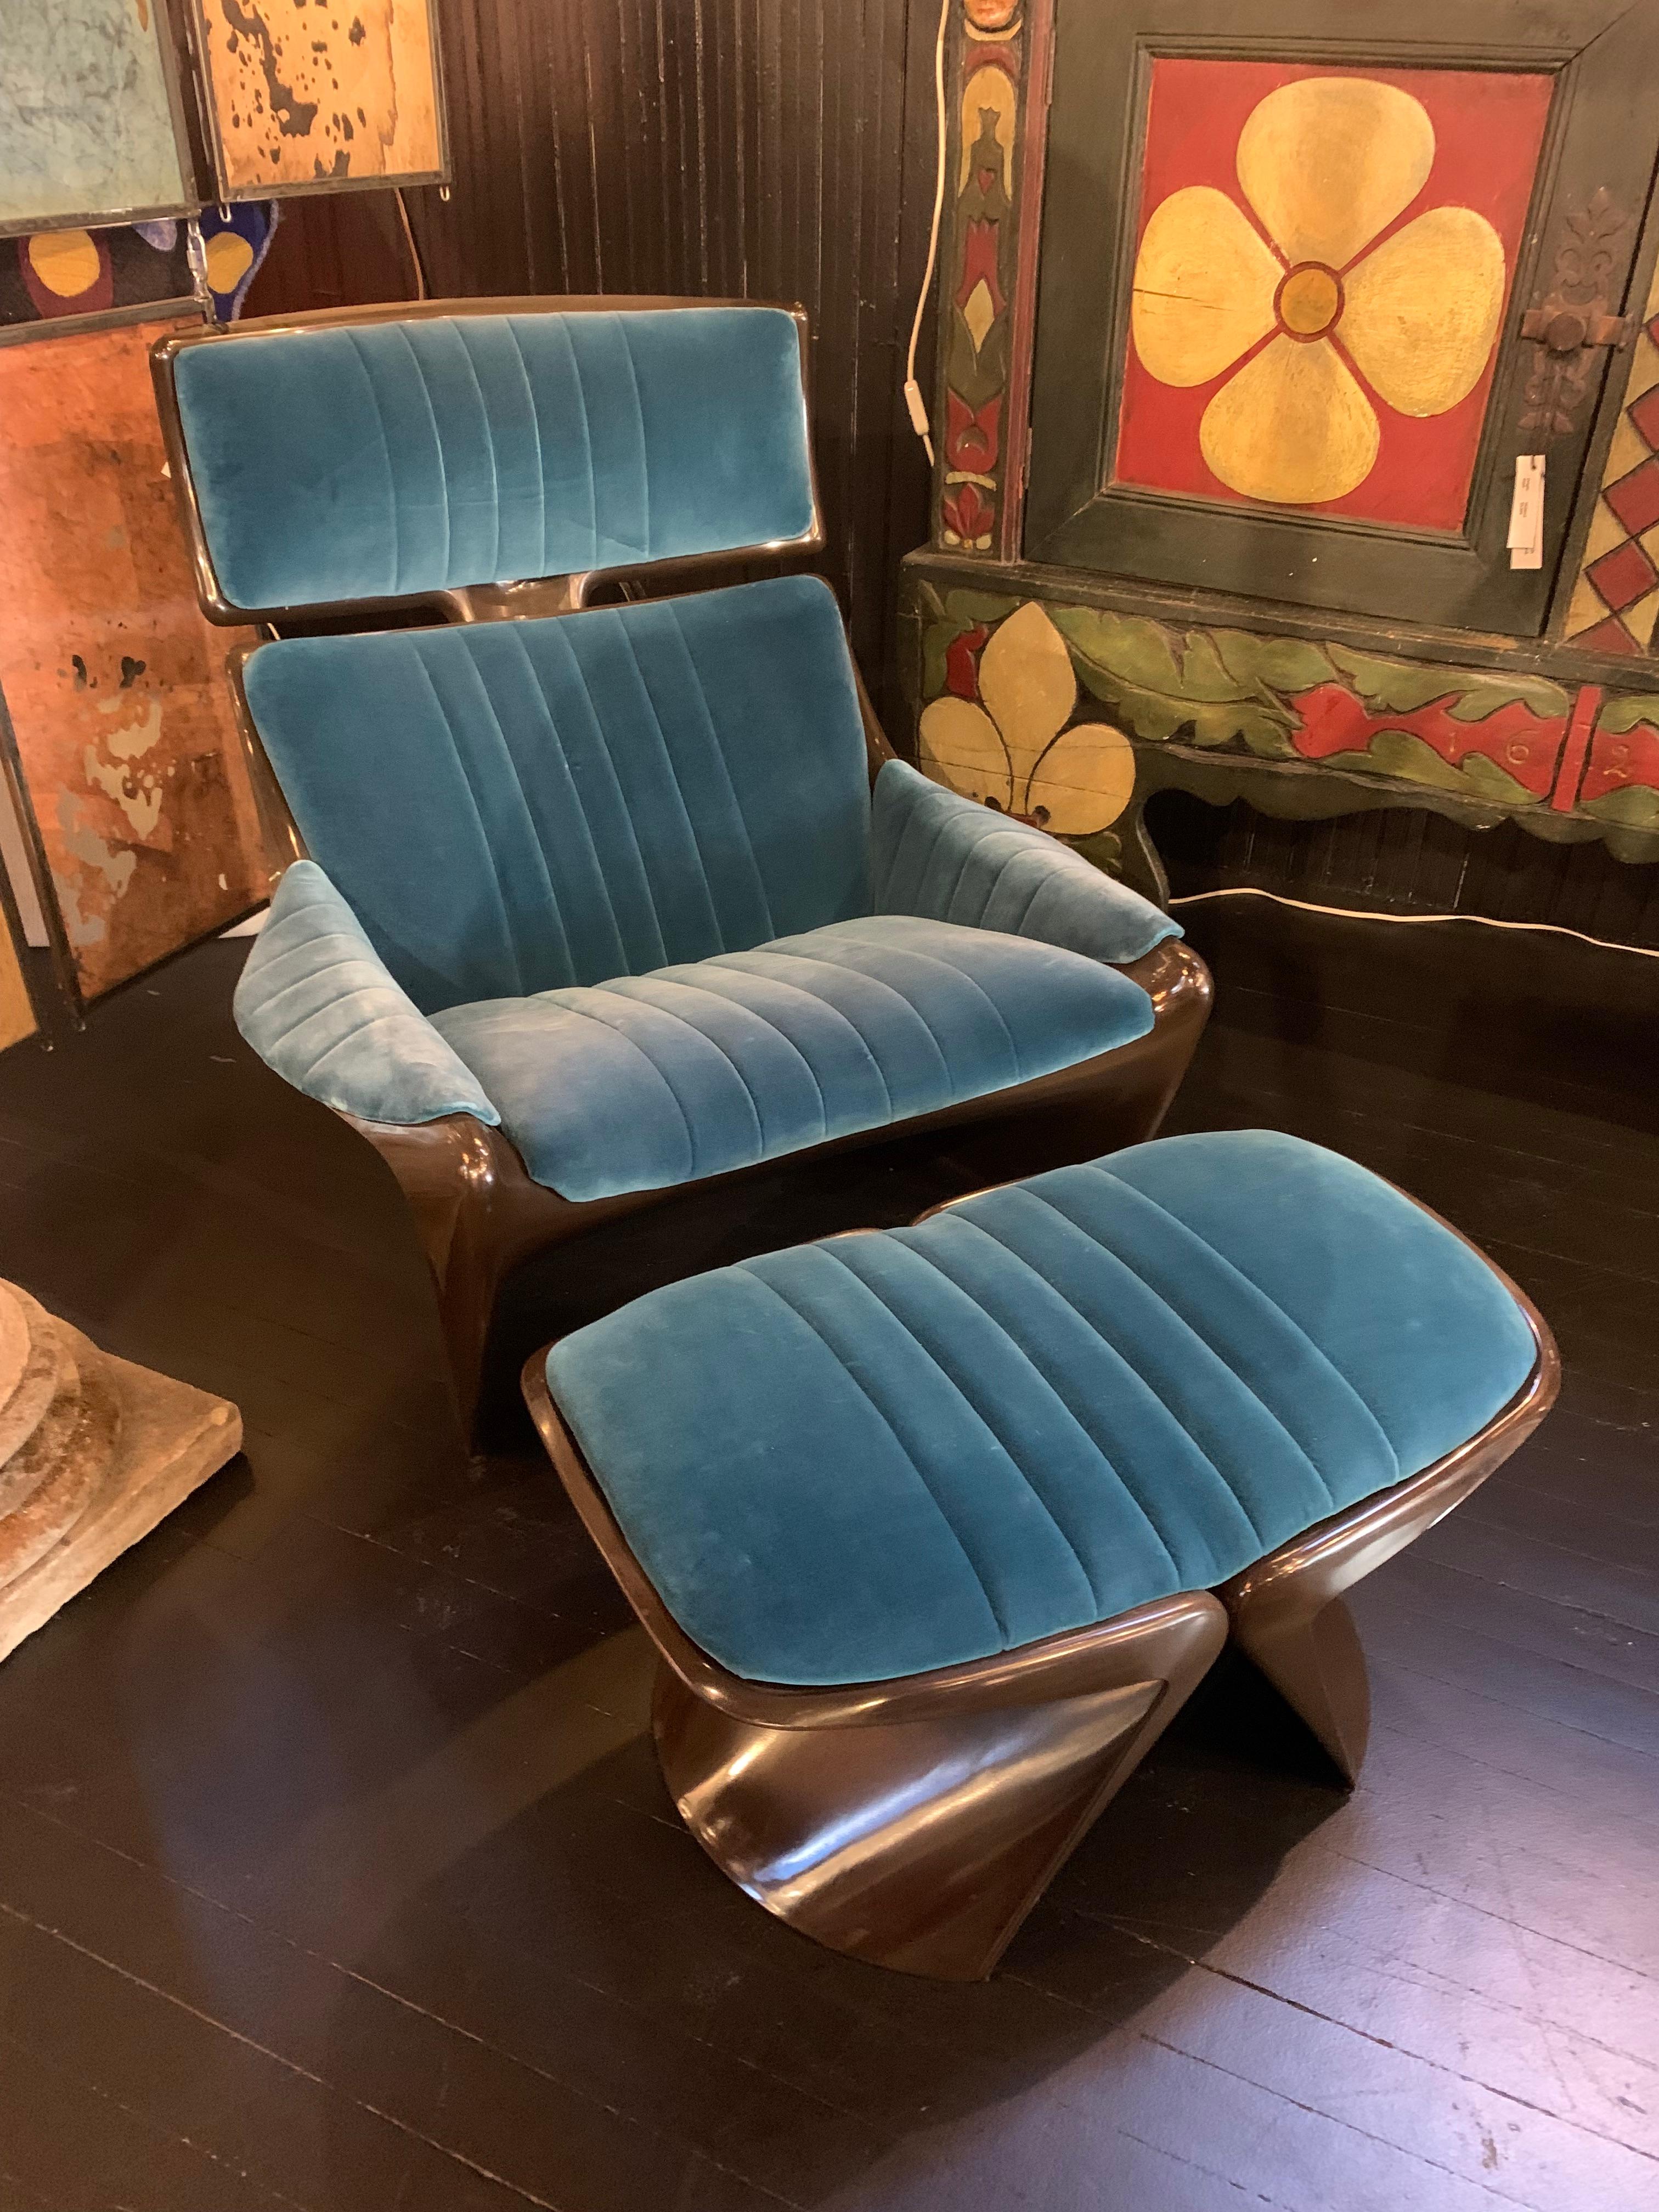 Vintage Mid-Century Modern 1960s or 1970s pair of Steen Ostergaard space age Meteor “President” lounge chairs with matching ottomans designed for Cado, Denmark. Brown molded fiberglass construction with teal velvet upholstery. Adjustable head/neck